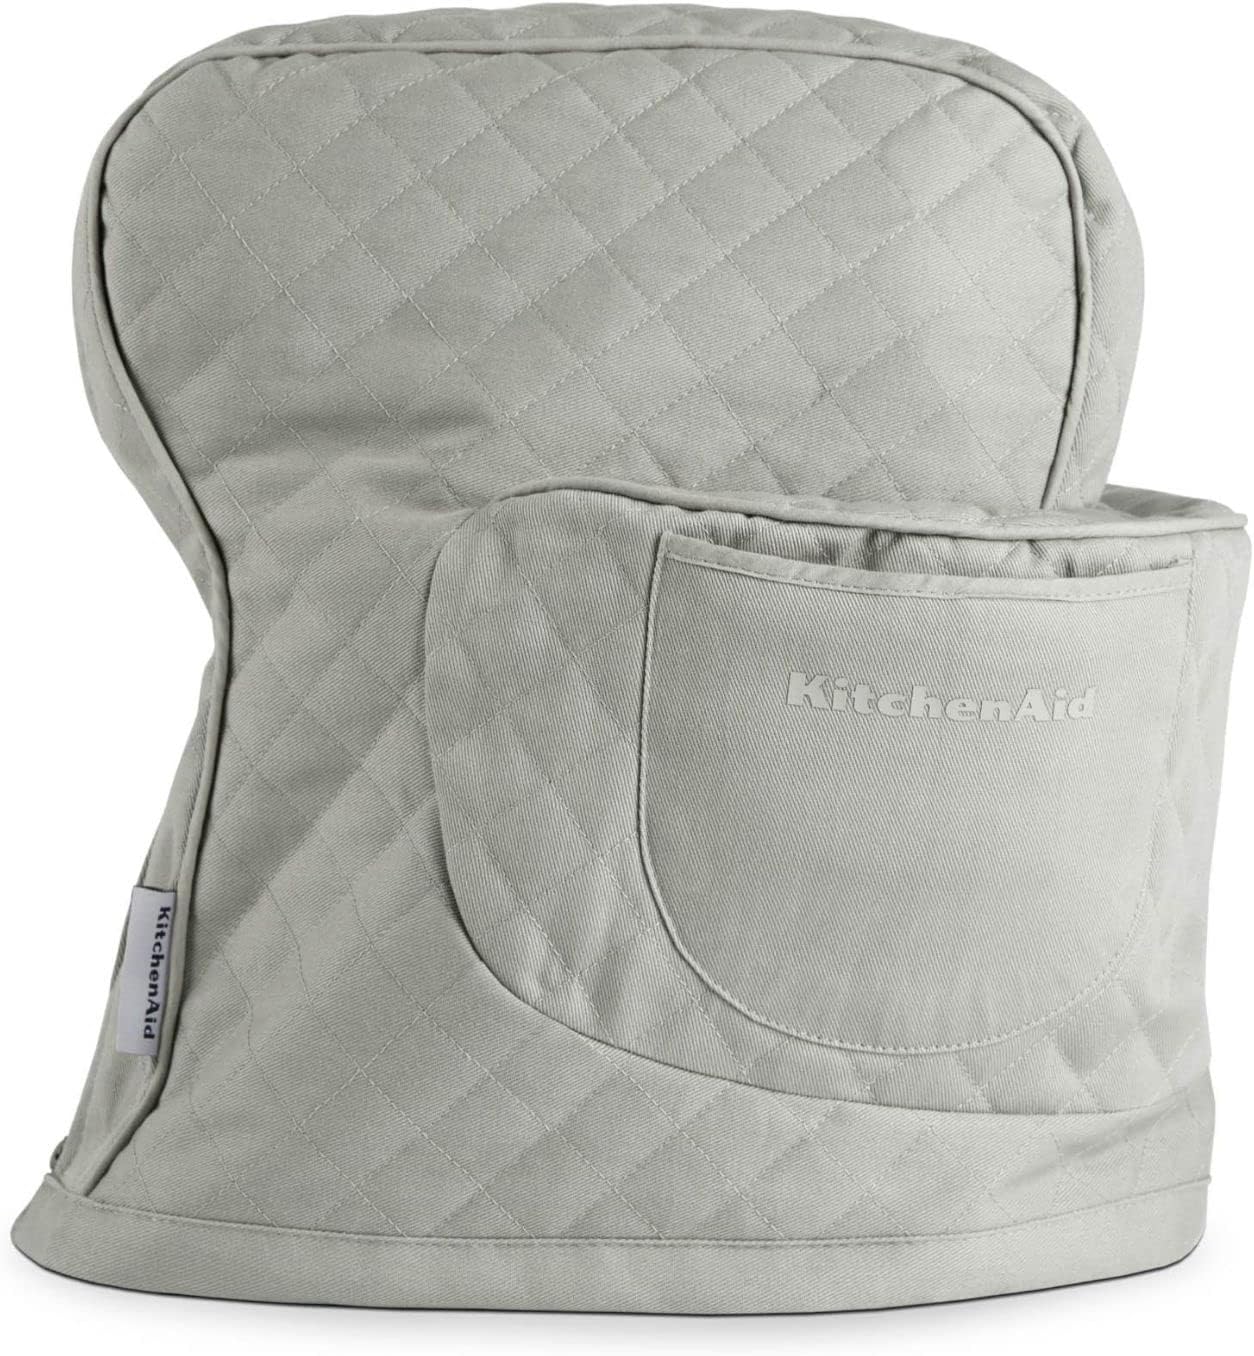 KitchenAid Quilted Fitted Tilt-Head Stand Mixer Cover (Grey) $14.55 + Free Shipping w/ Prime or on $35+